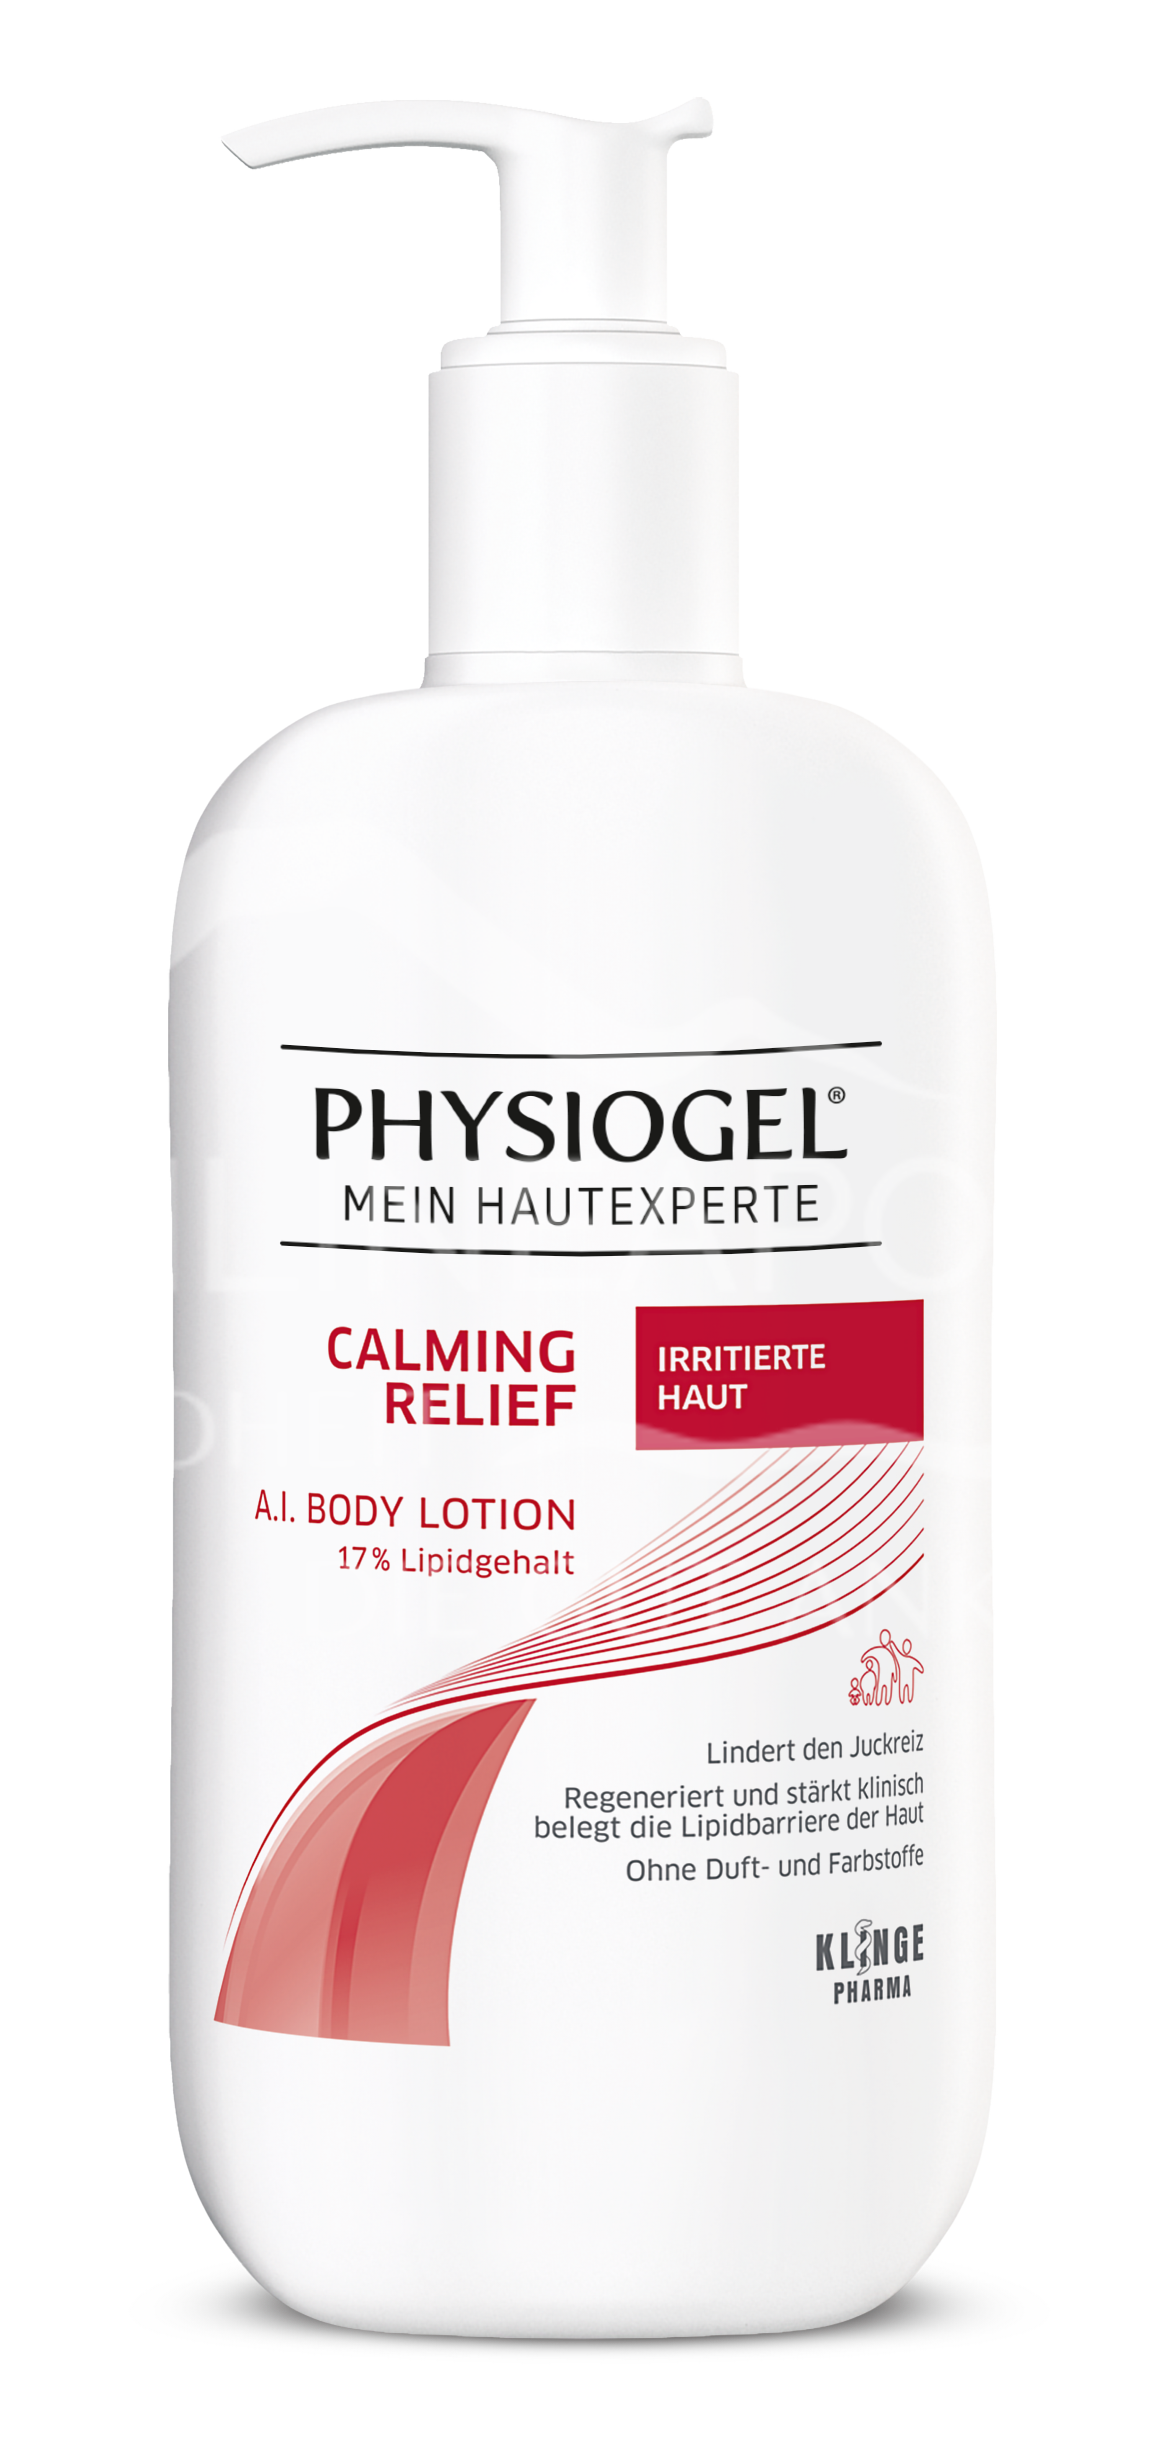 Physiogel® Calming Relief A.I. Body Lotion - Irritierte Haut